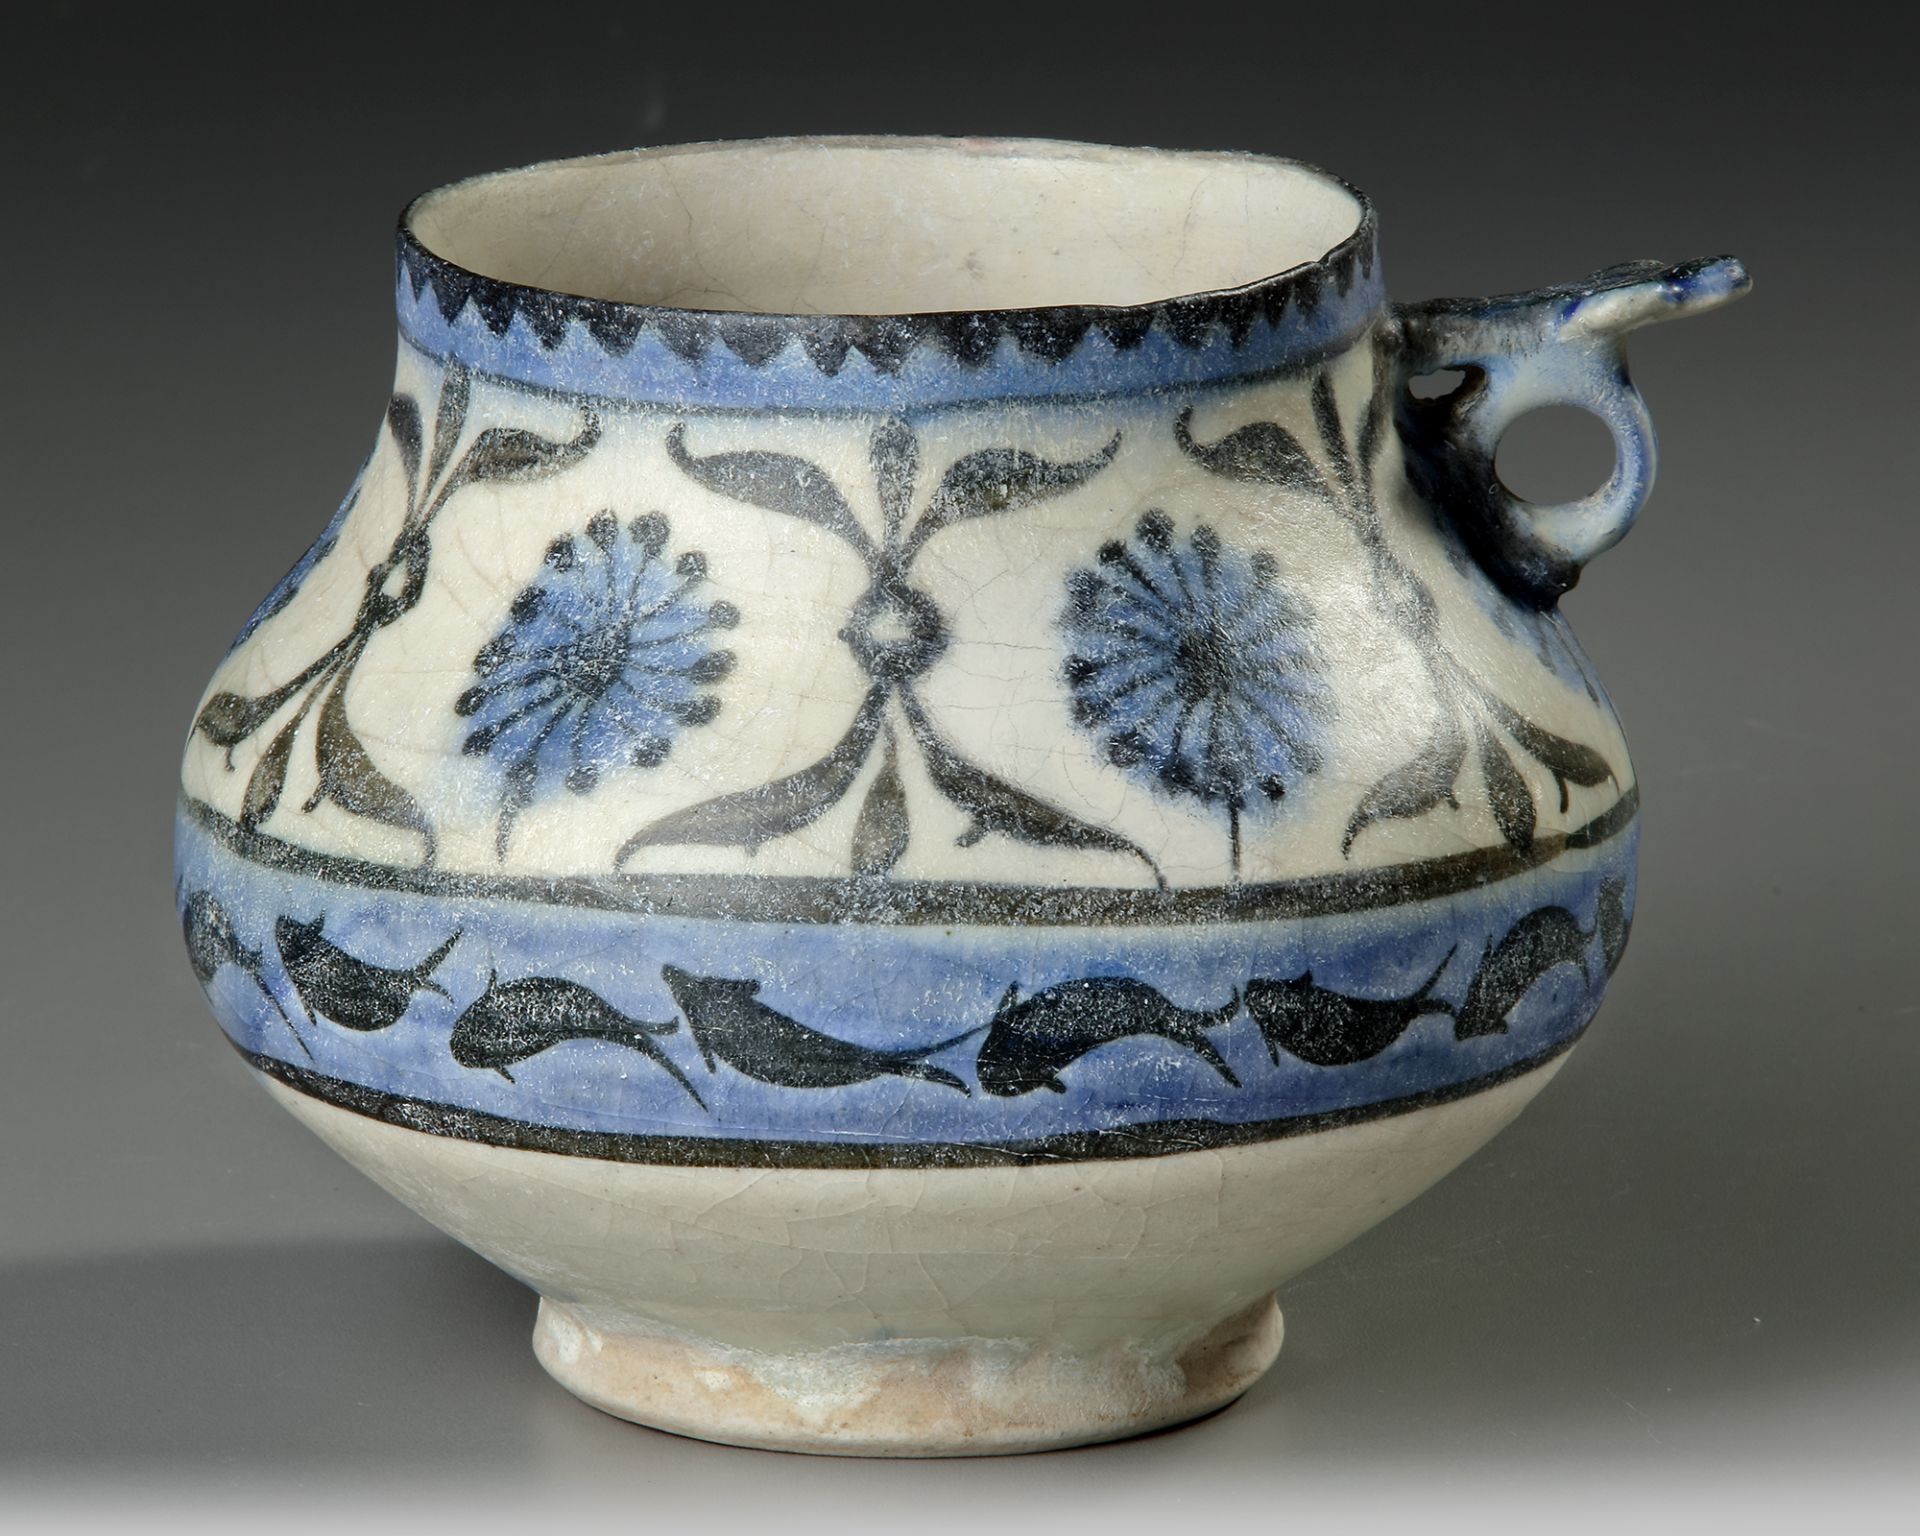 A KASHAN POTTERY JUG, PERSIA, EARLY 13TH CENTURY - Image 3 of 8